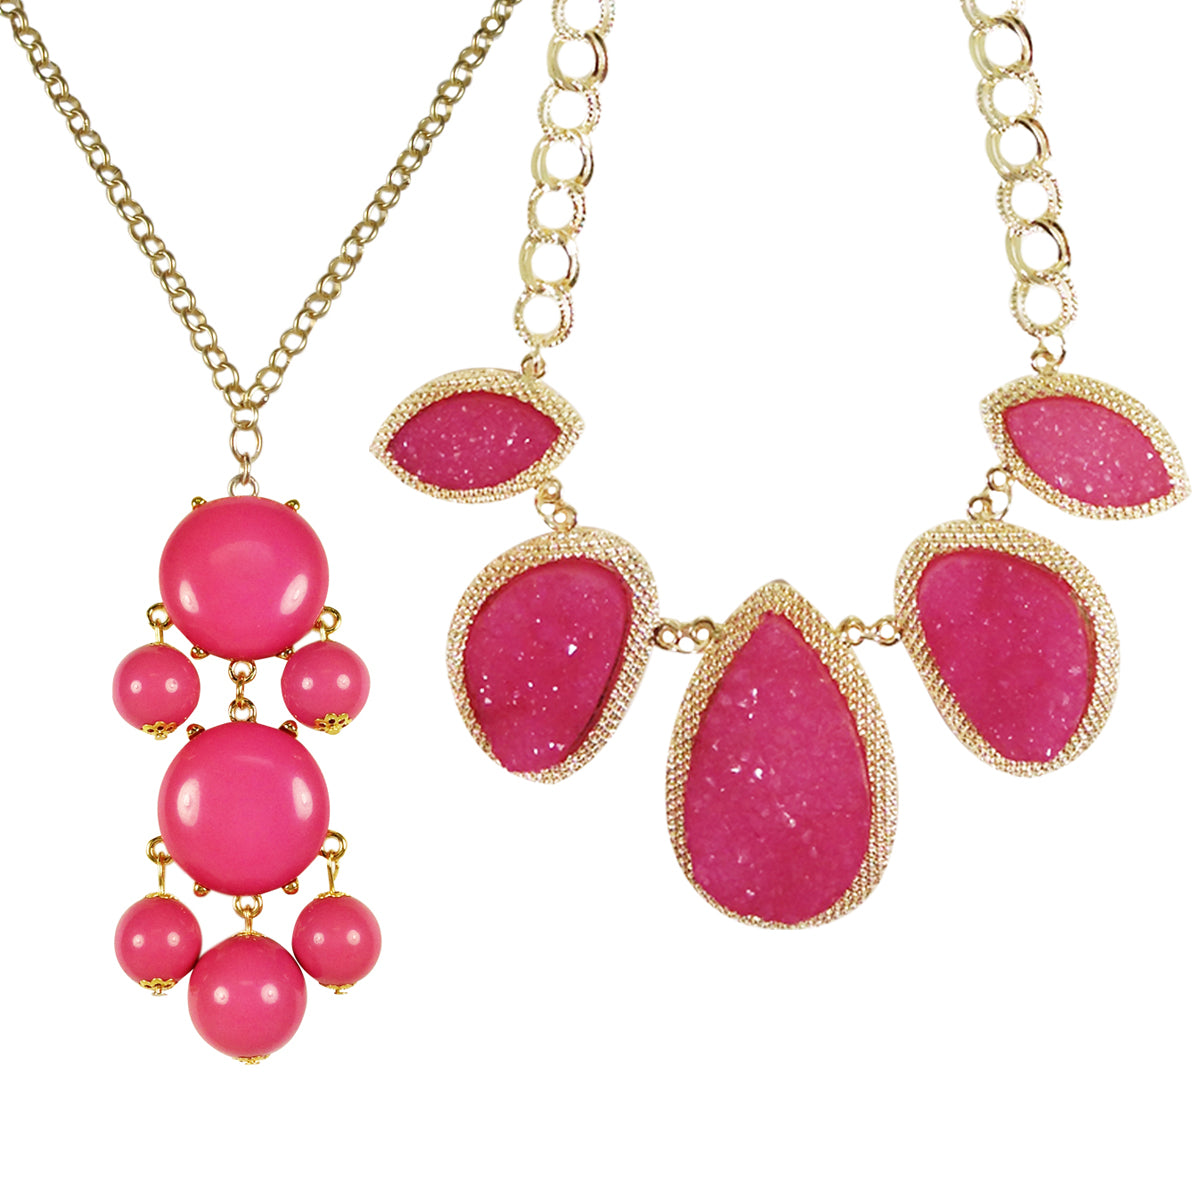 Hot Pink Beaded Bubble Pendant Necklace + Stone Necklace